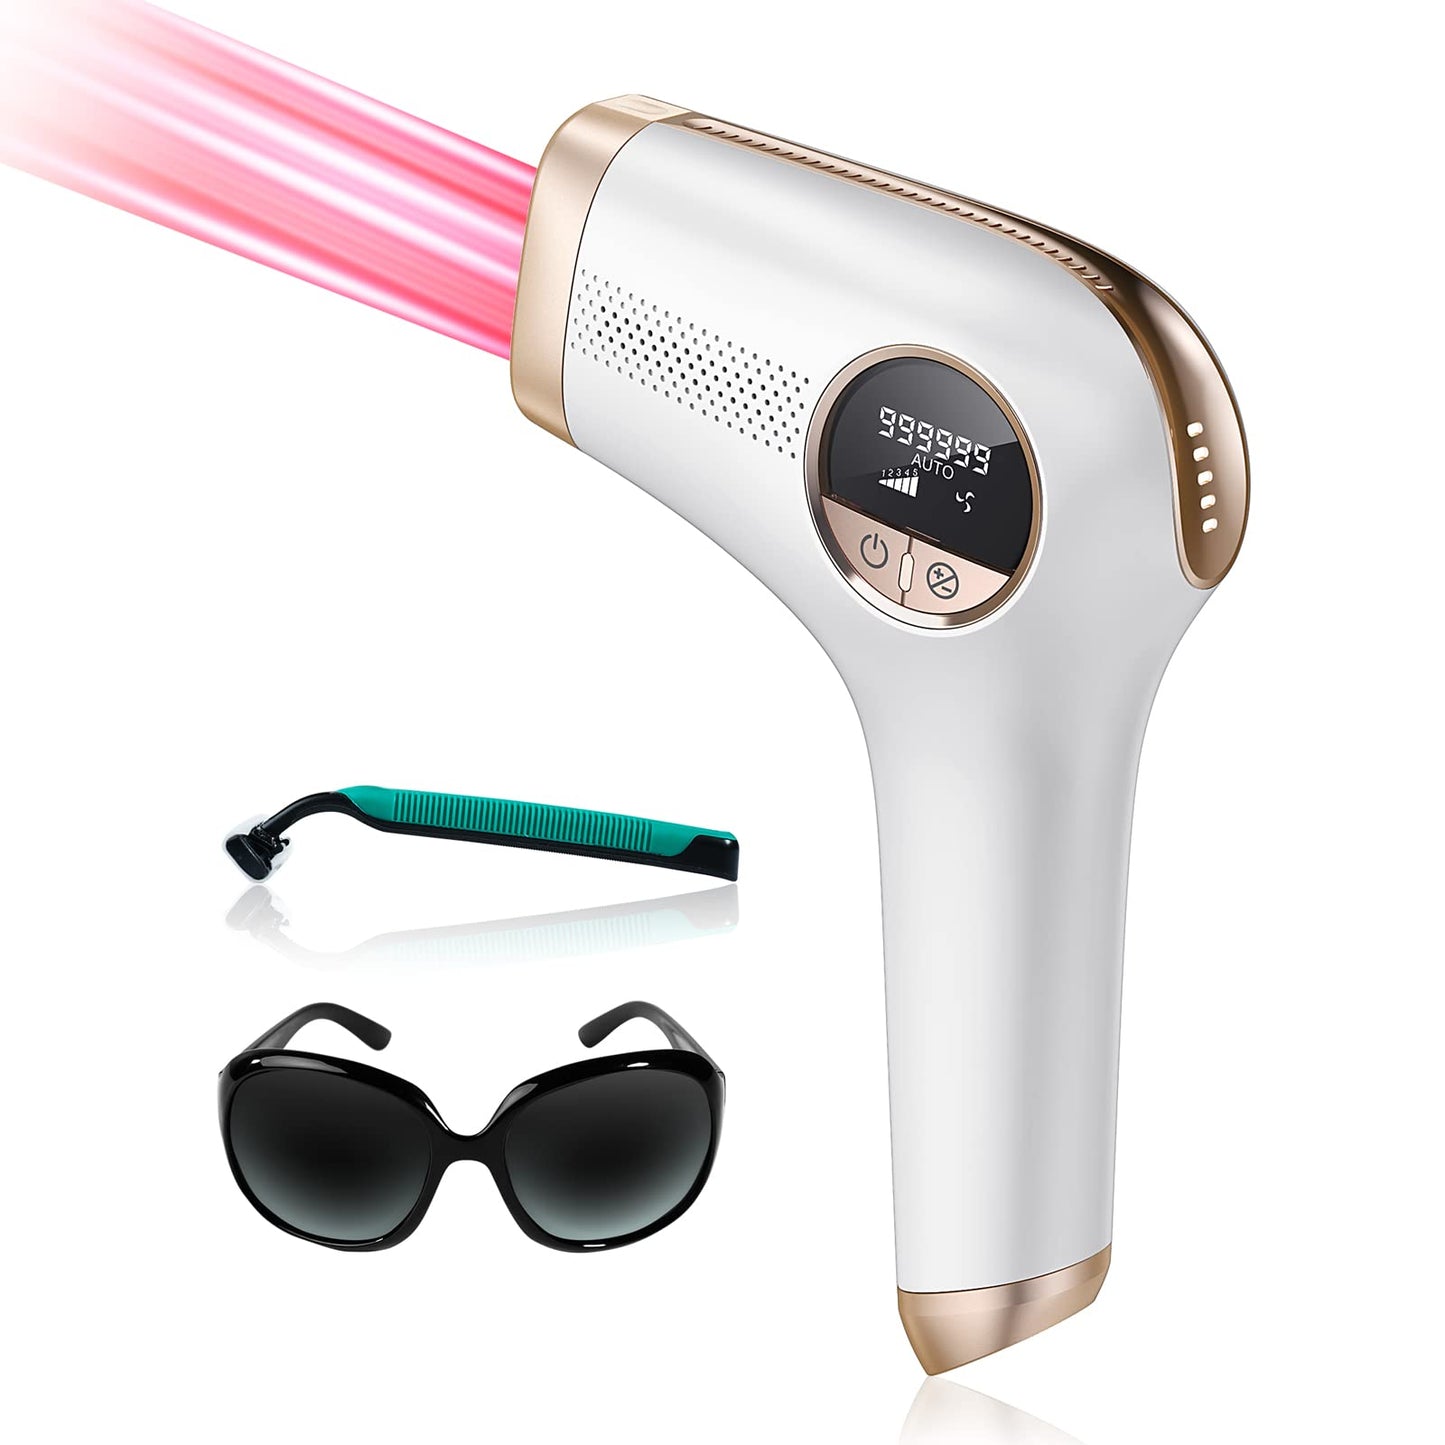 Laser Hair Removal,Permanent IPL Hair Removal for Women at Home Use Laser Hair Remover Painless Hair Removal Device for Whole Body Use